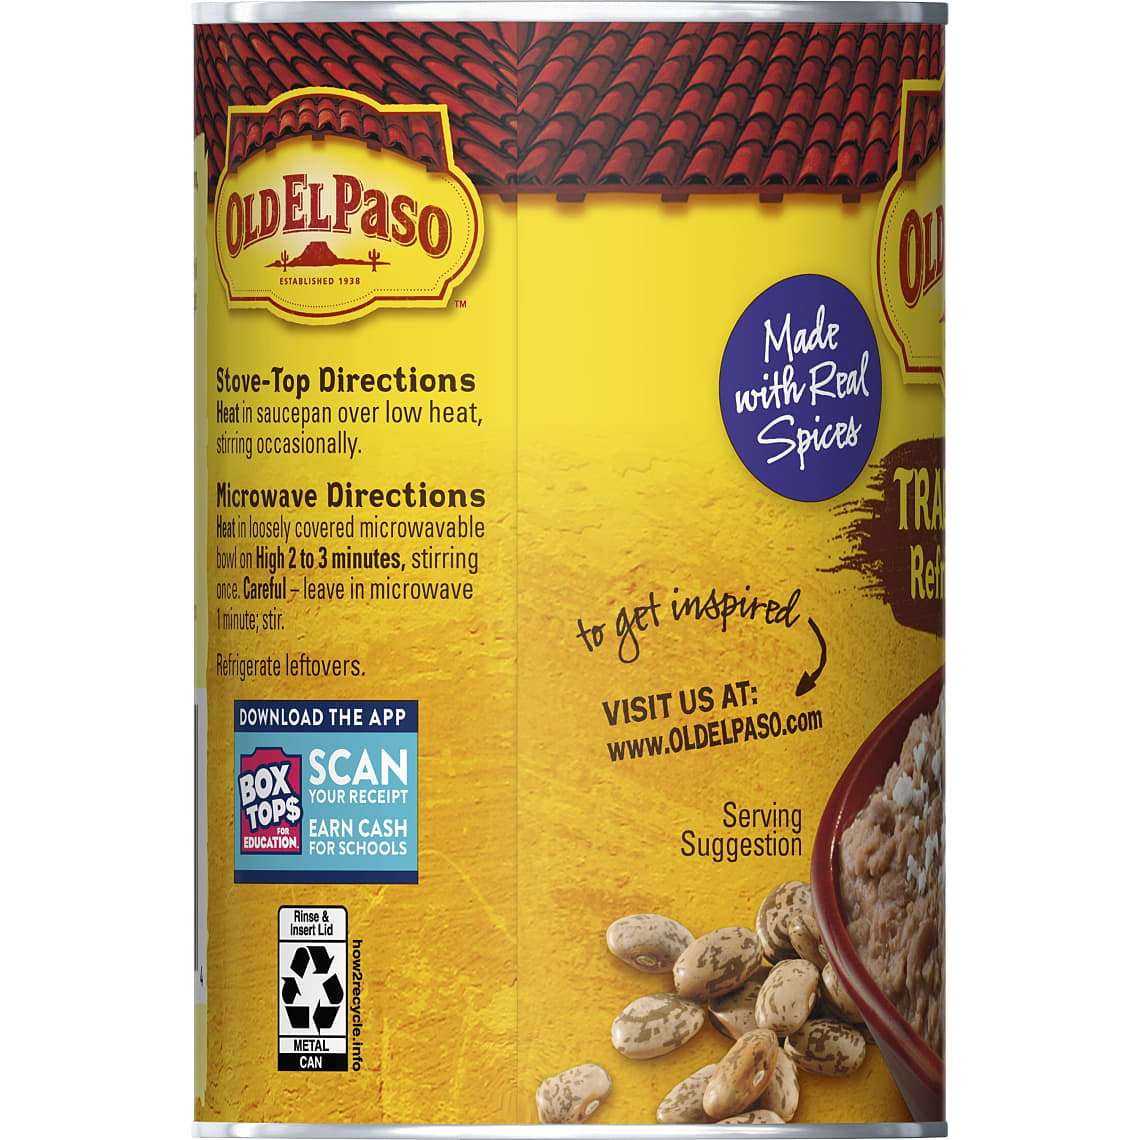 Old El Paso™ Traditional Canned Refried Beans, 16 oz - Gerbes